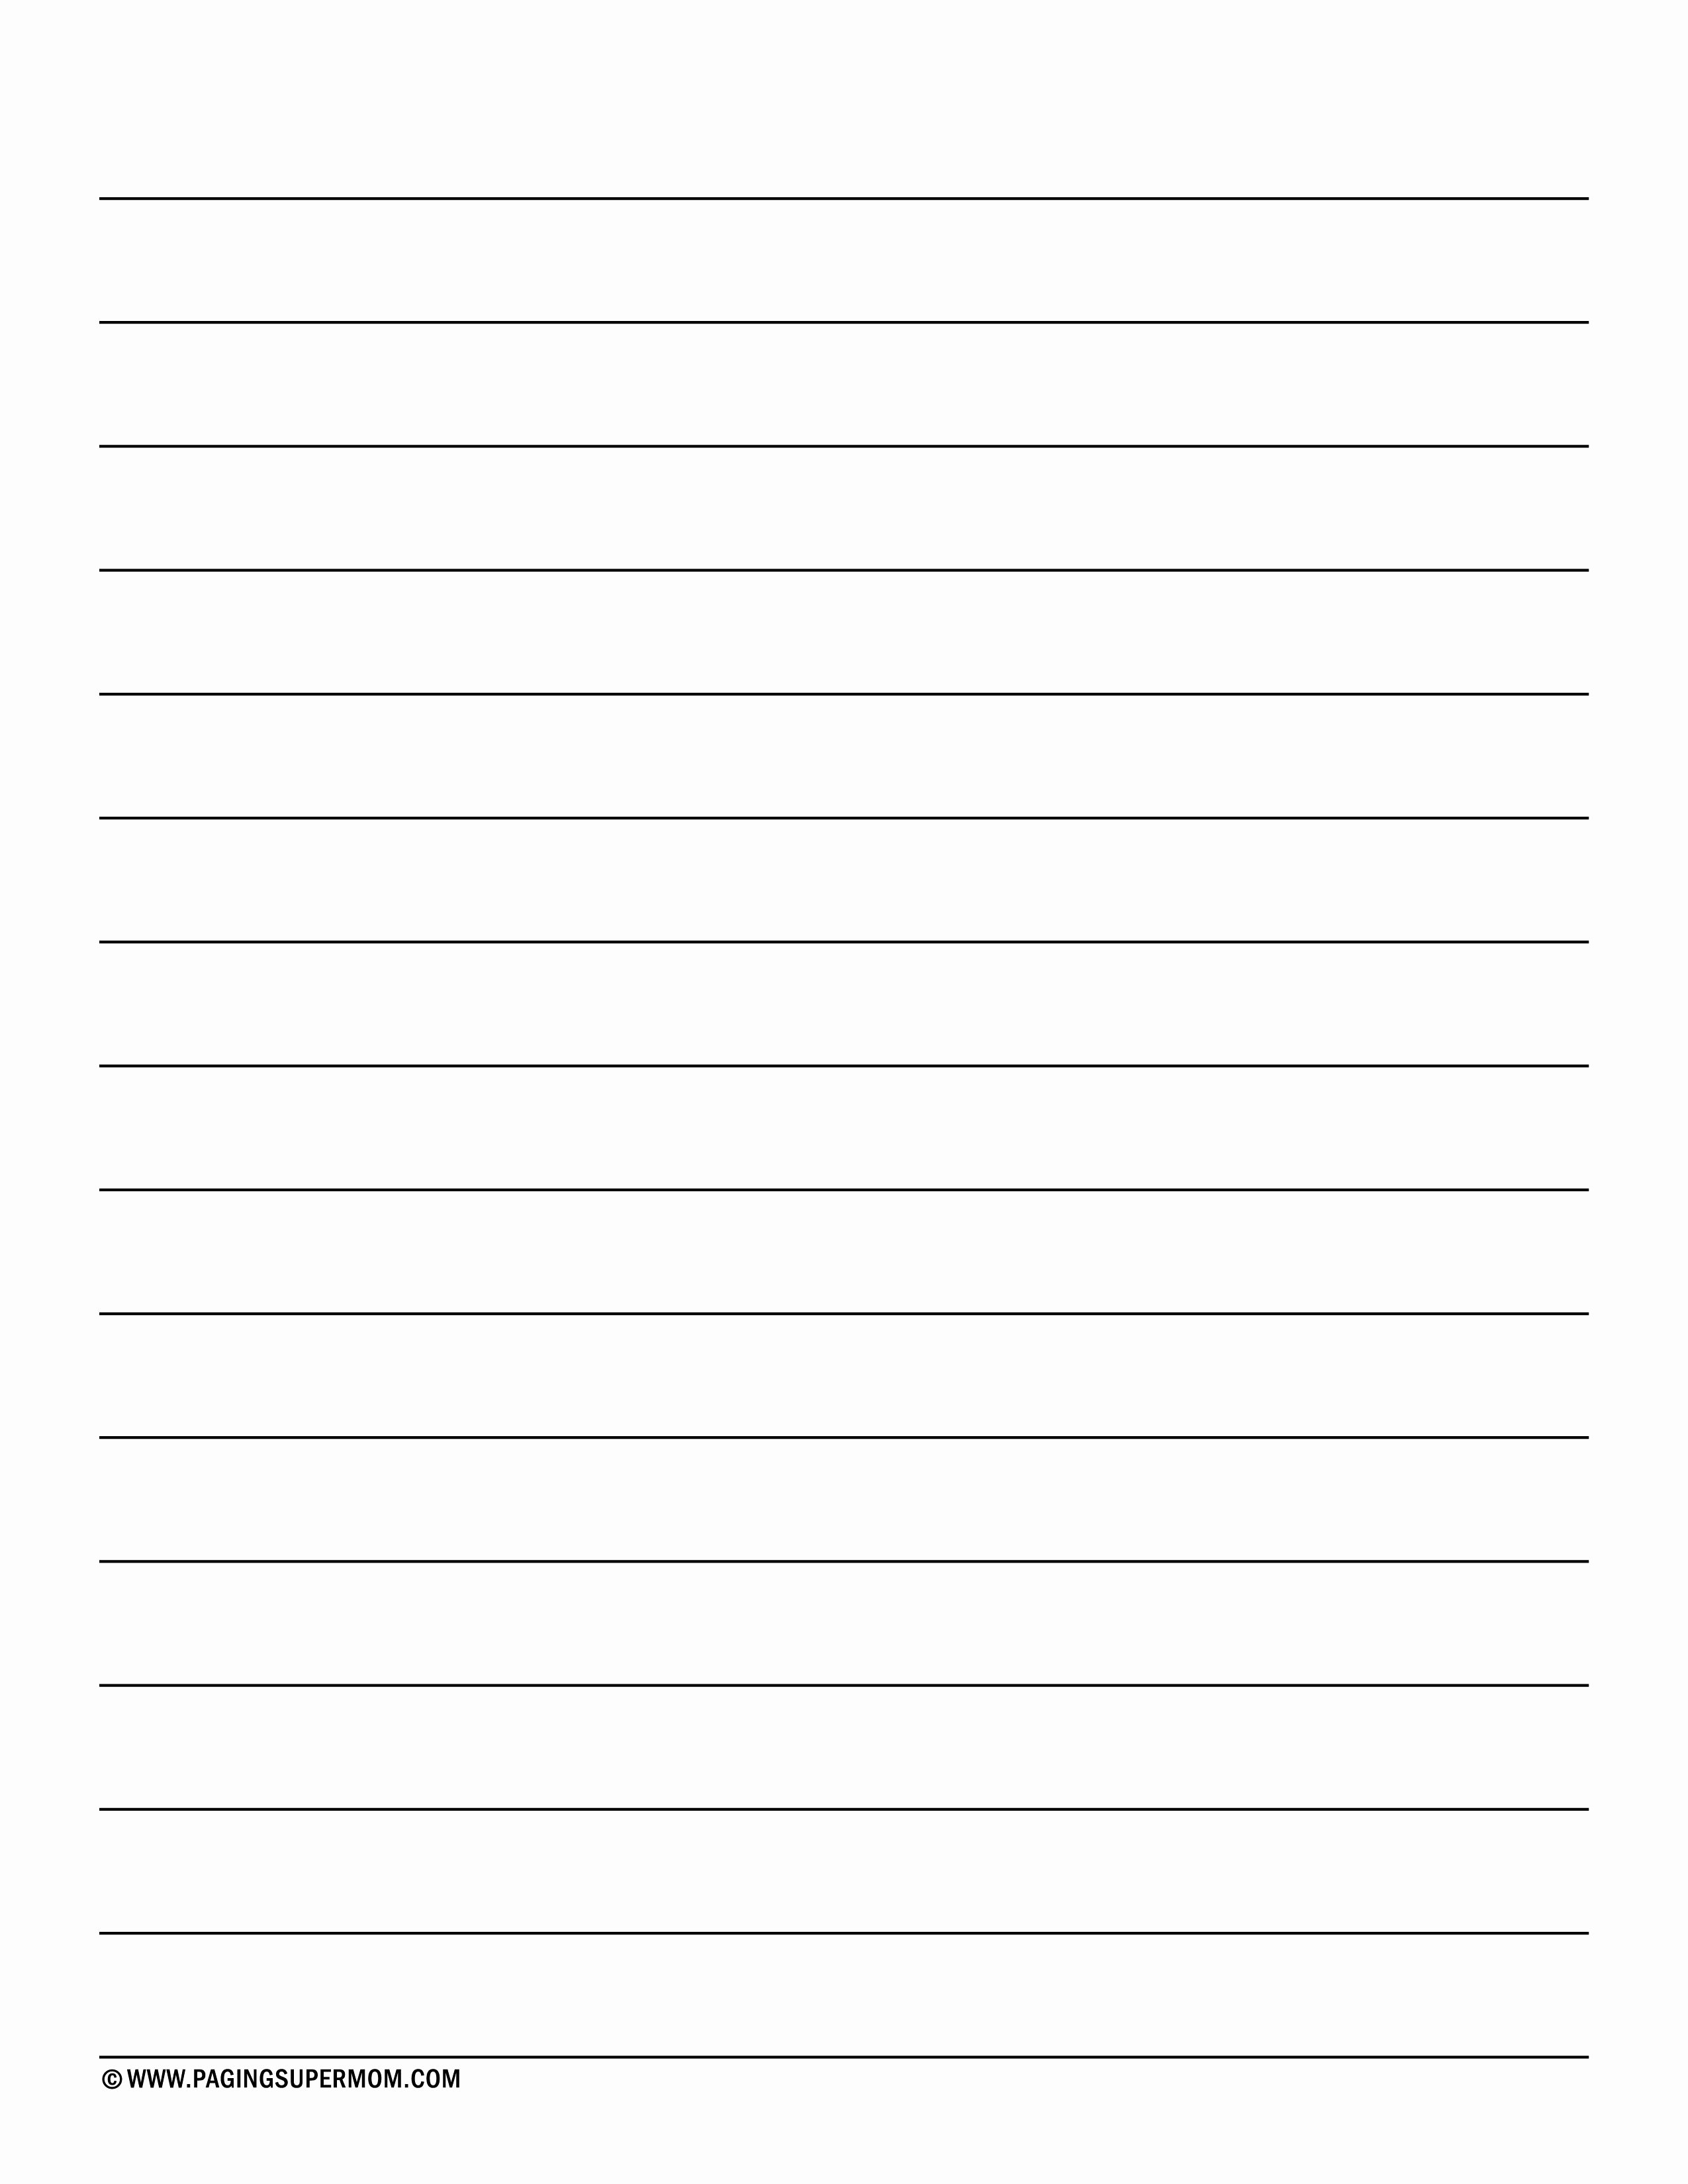 Picture Of Lined Paper New Vertical Spalding Inspired Lined Paper